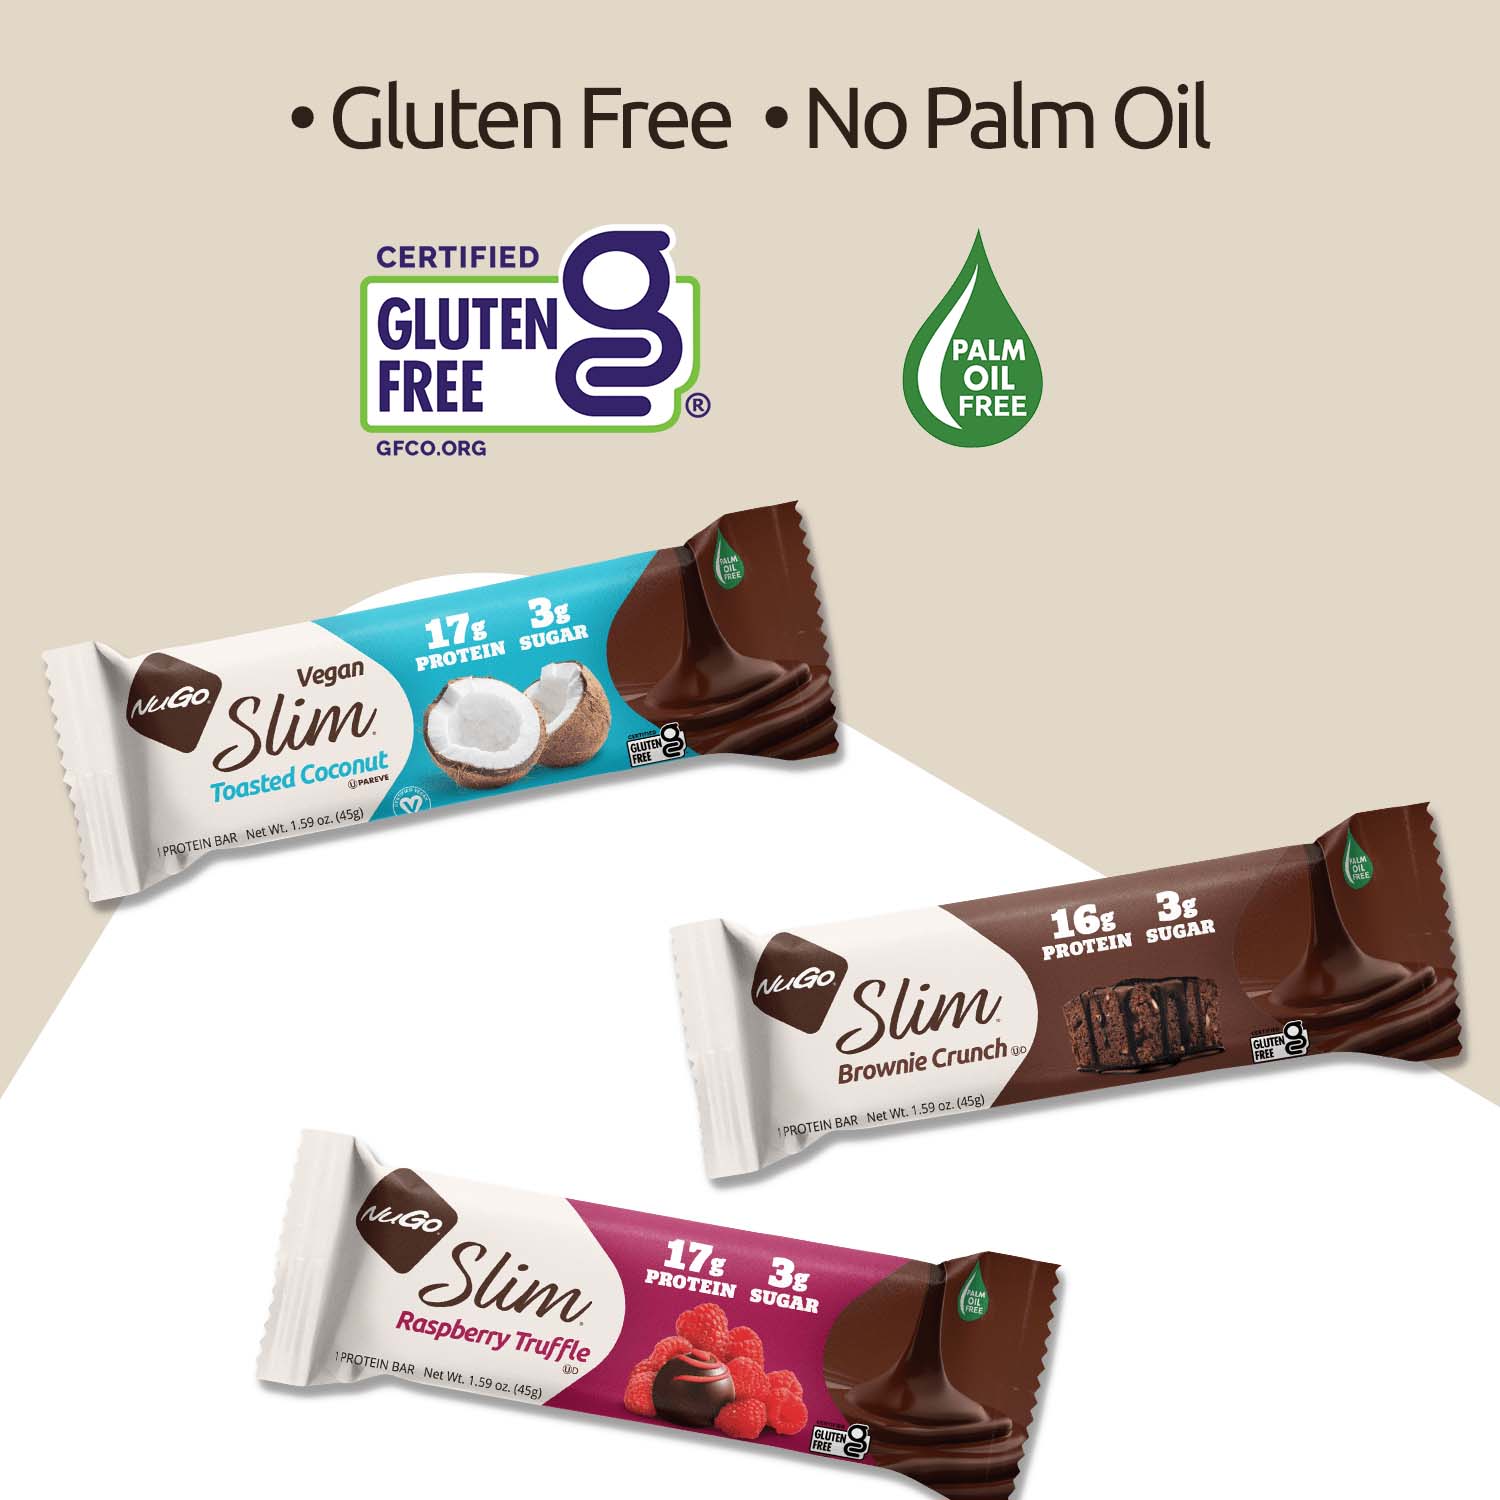 Gluten Free, No Palm Oil Text Image